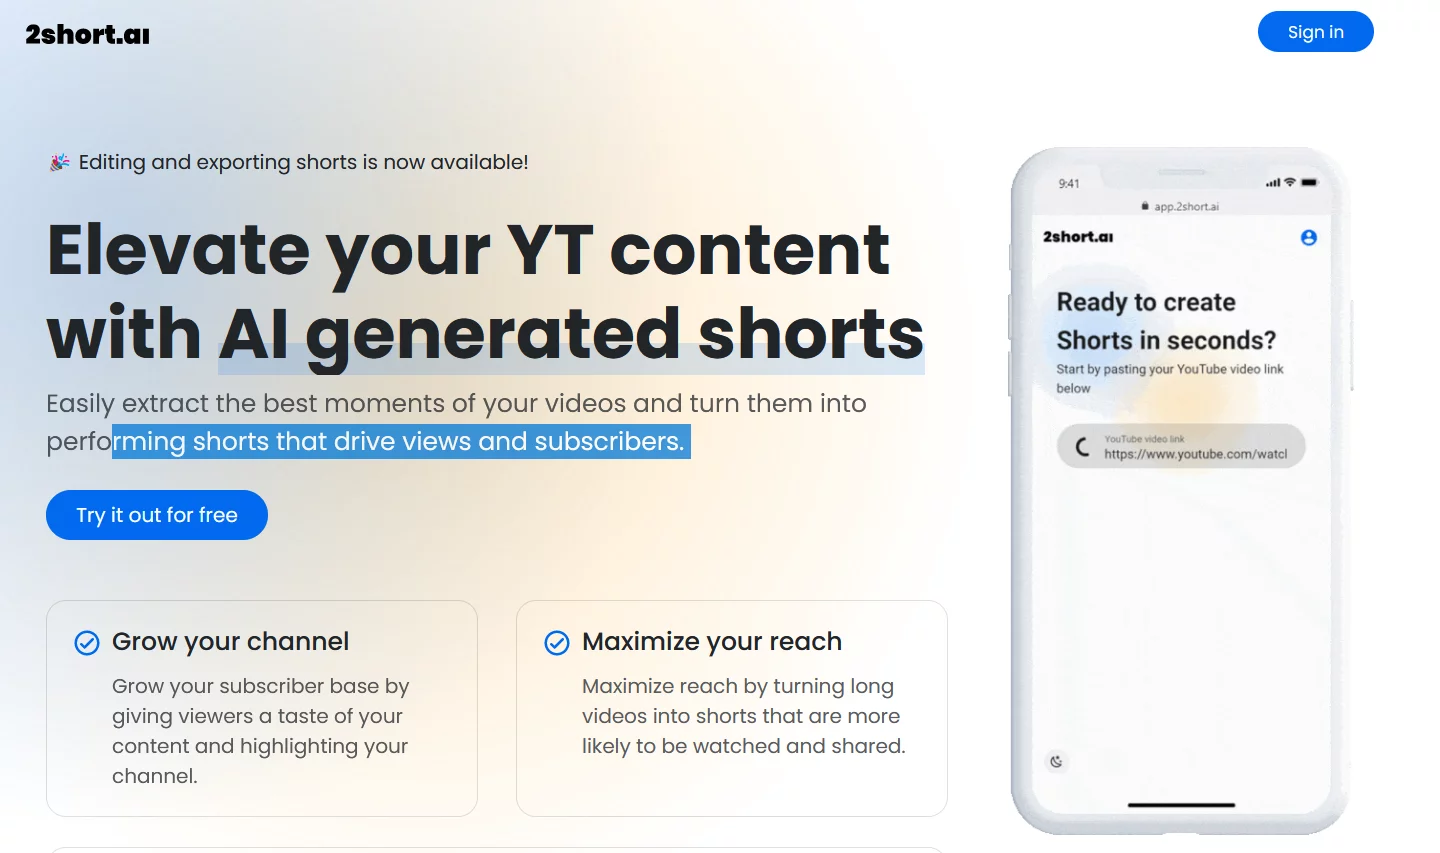   Elevate your YT content with AI generated shorts